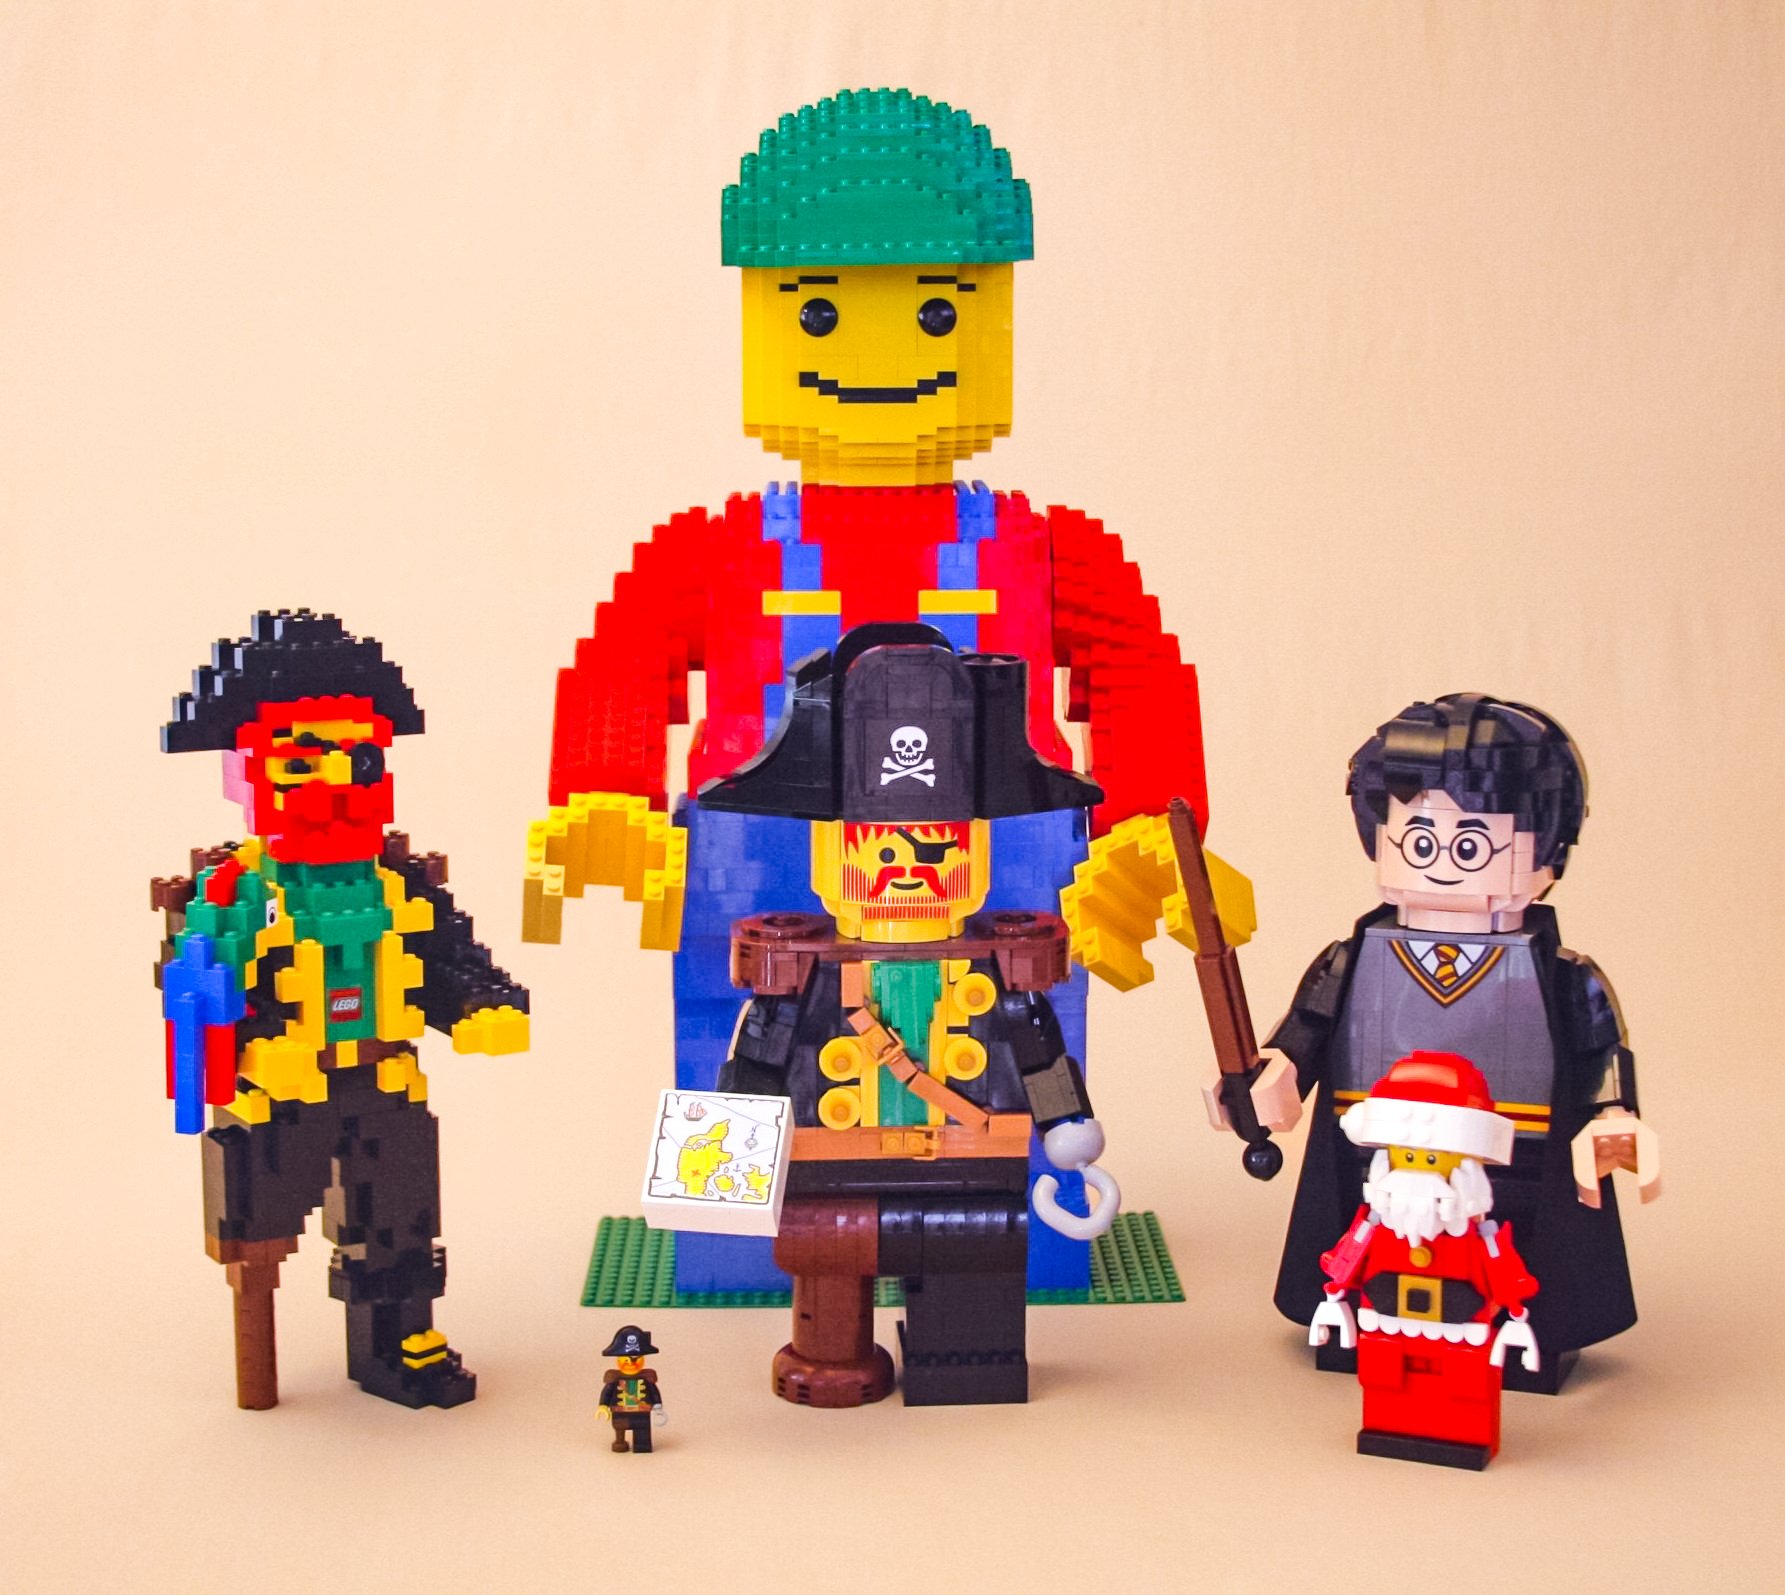 Brick Built Scaling Up a Beloved Classic BrickNerd - All things LEGO and the LEGO fan community